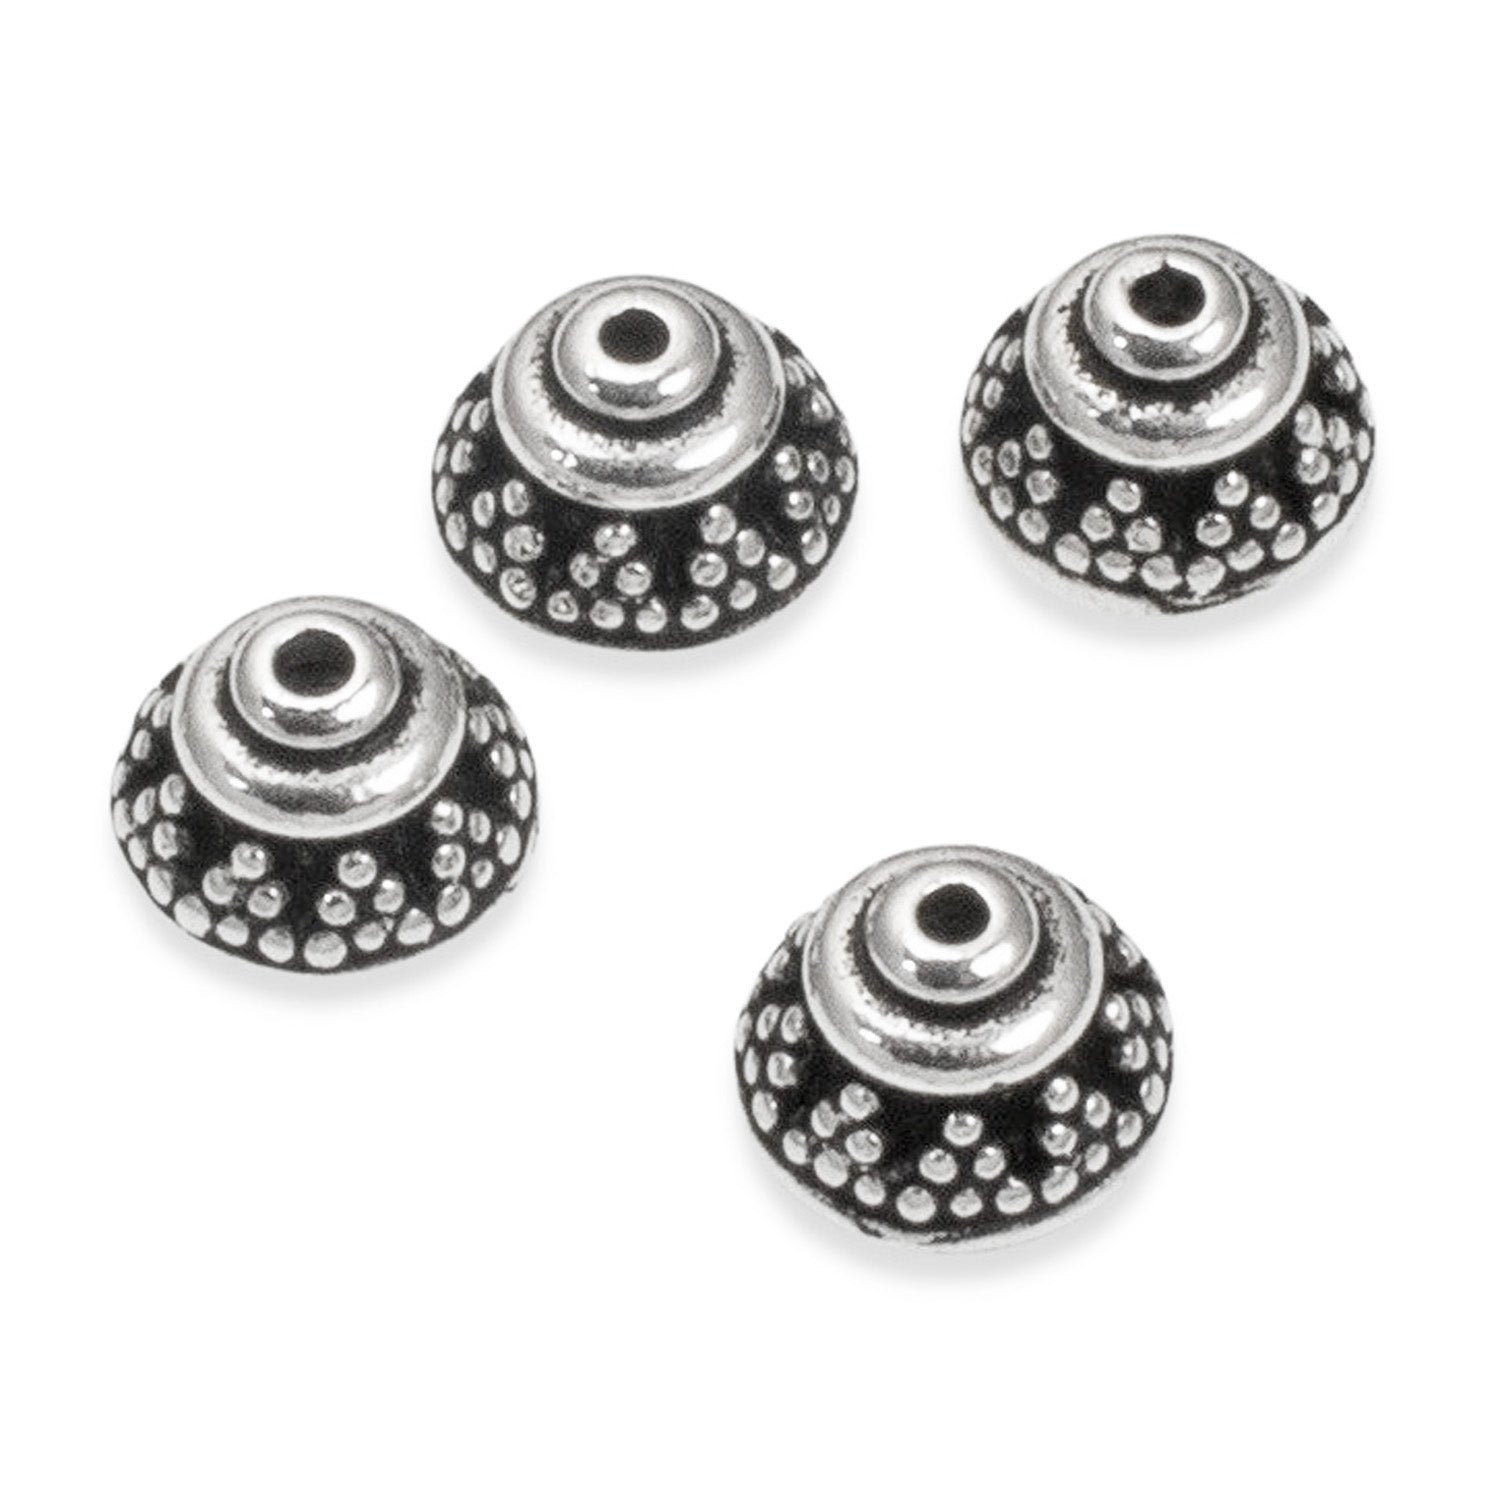 Bali Sterling Silver Beads | Bead Caps | 5mm Diameter | 2 pieces